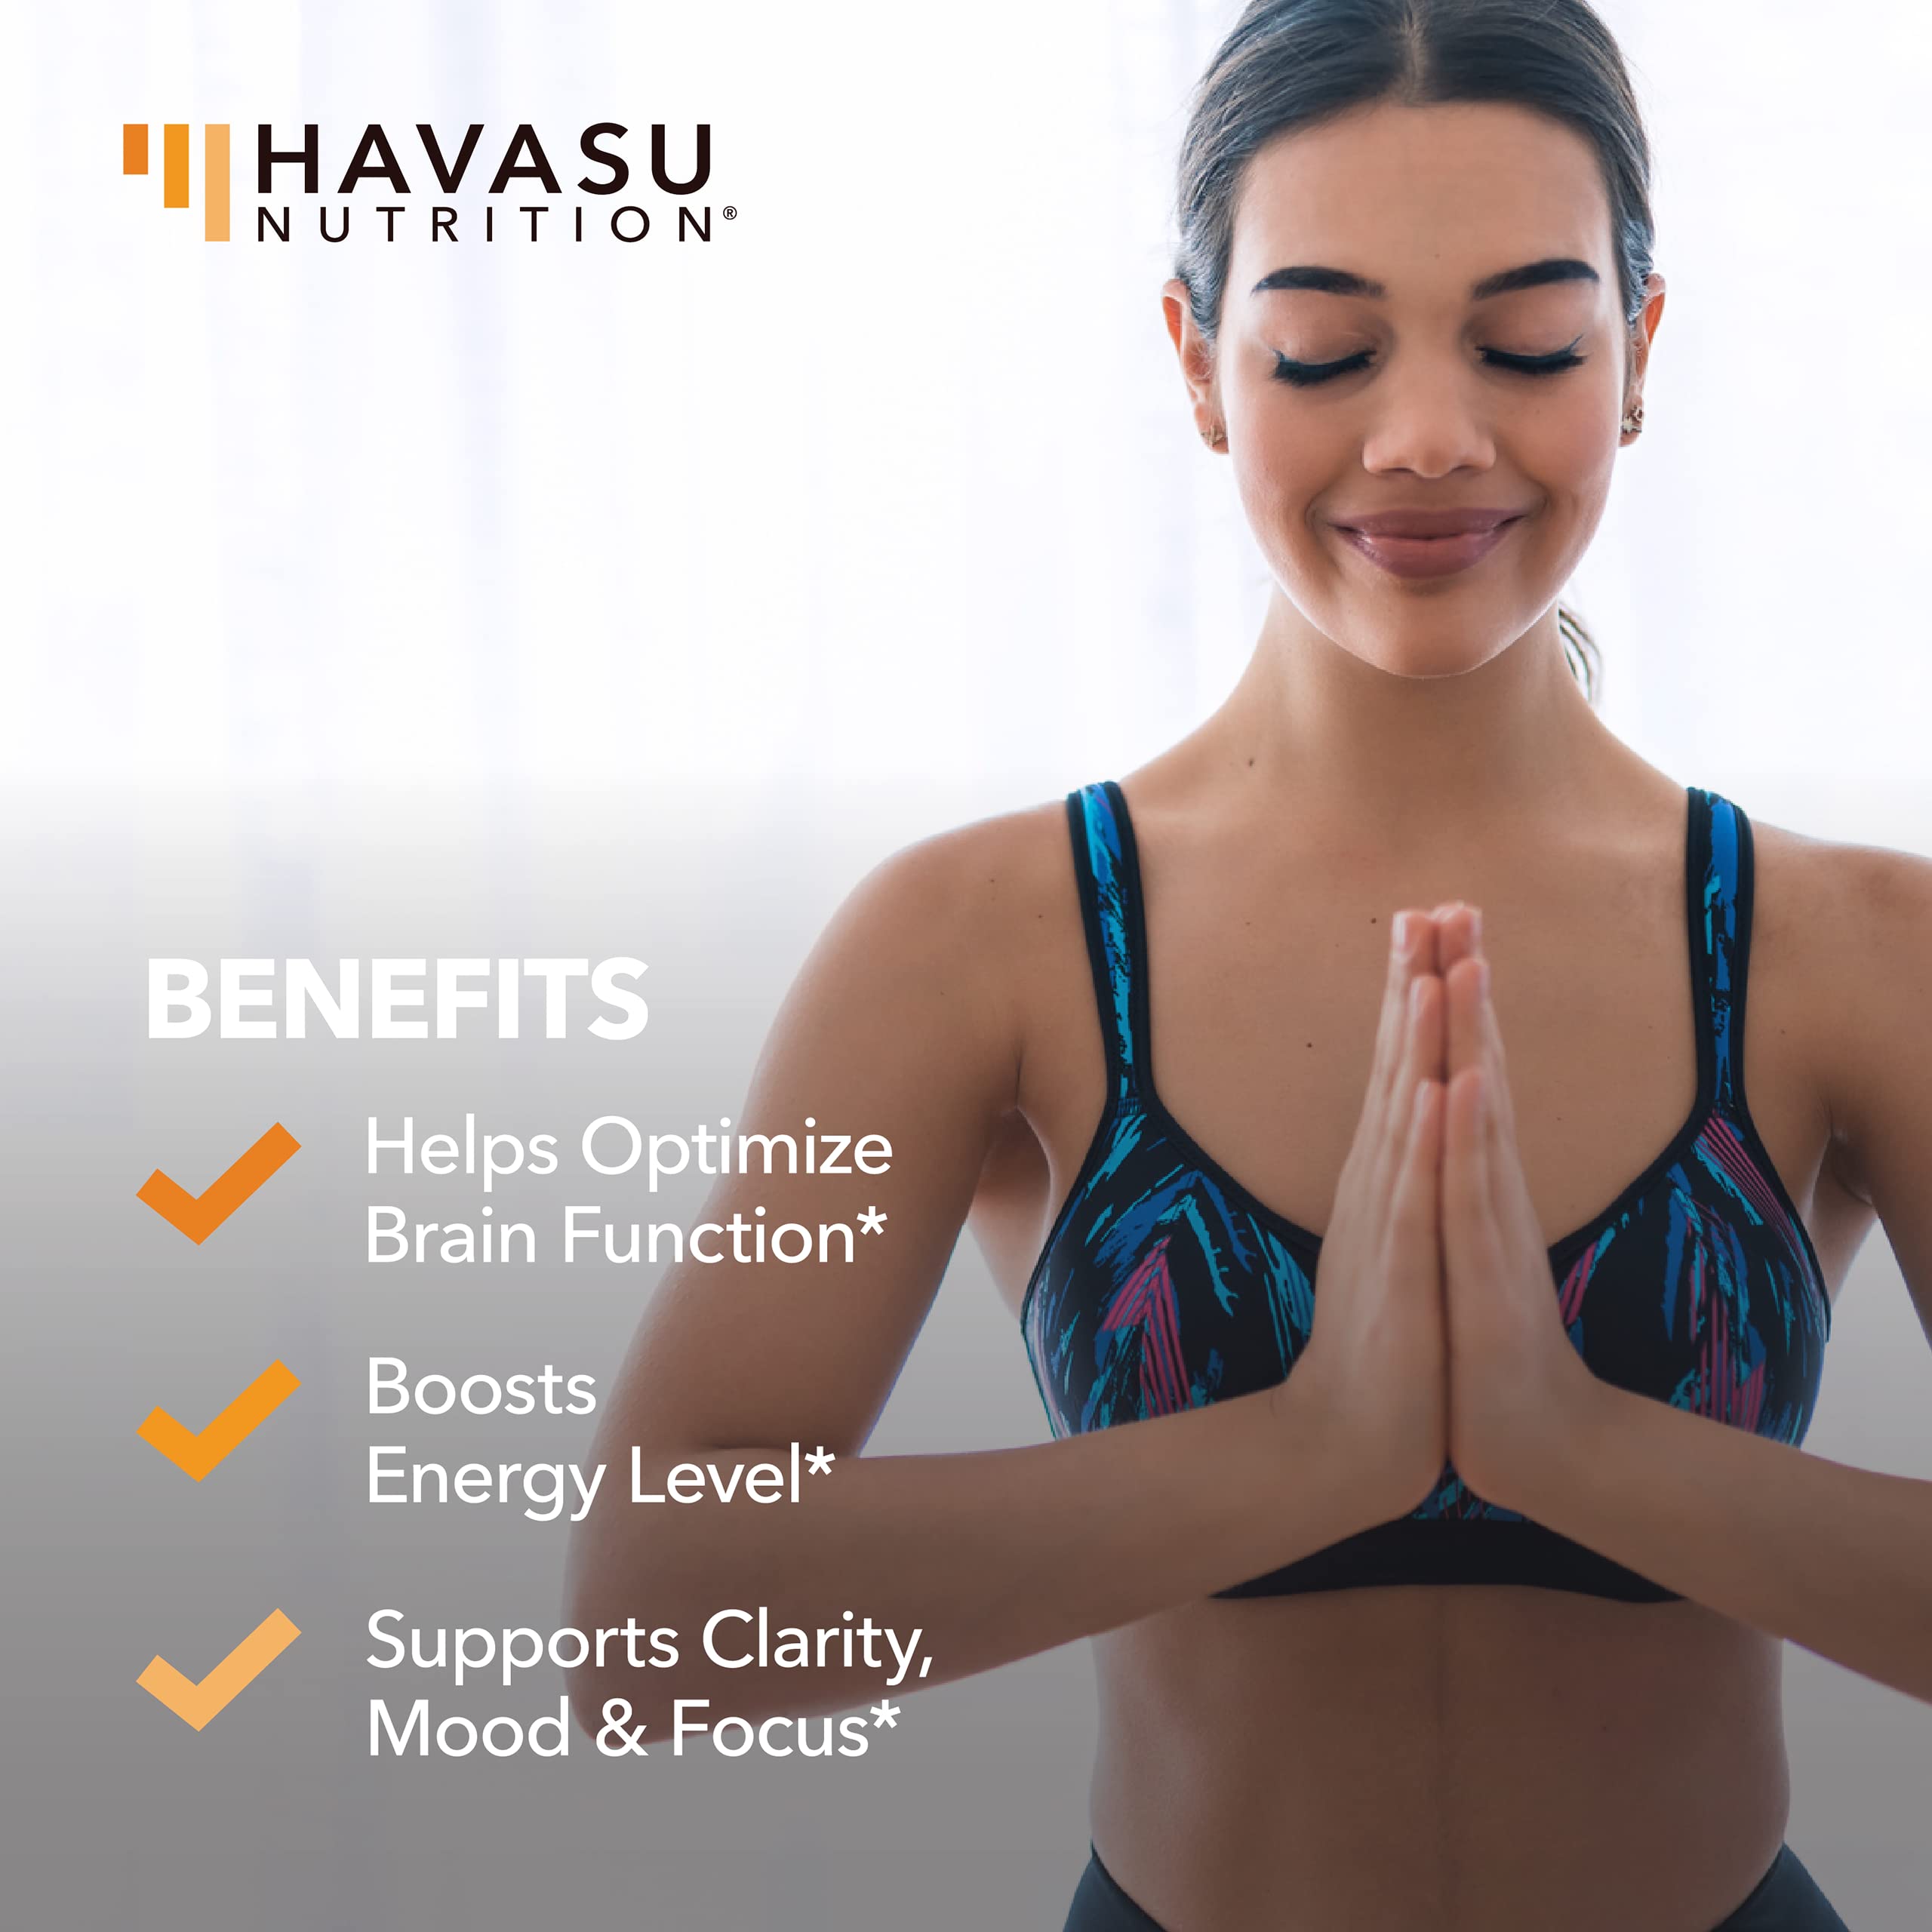 HAVASU NUTRITION NeuroIgnite Nootropic Focus Brain Support to Reduce Fog and Increase Memory & Cognition | Perfect for Students and Full-Time Employees | No Jitters or Crash